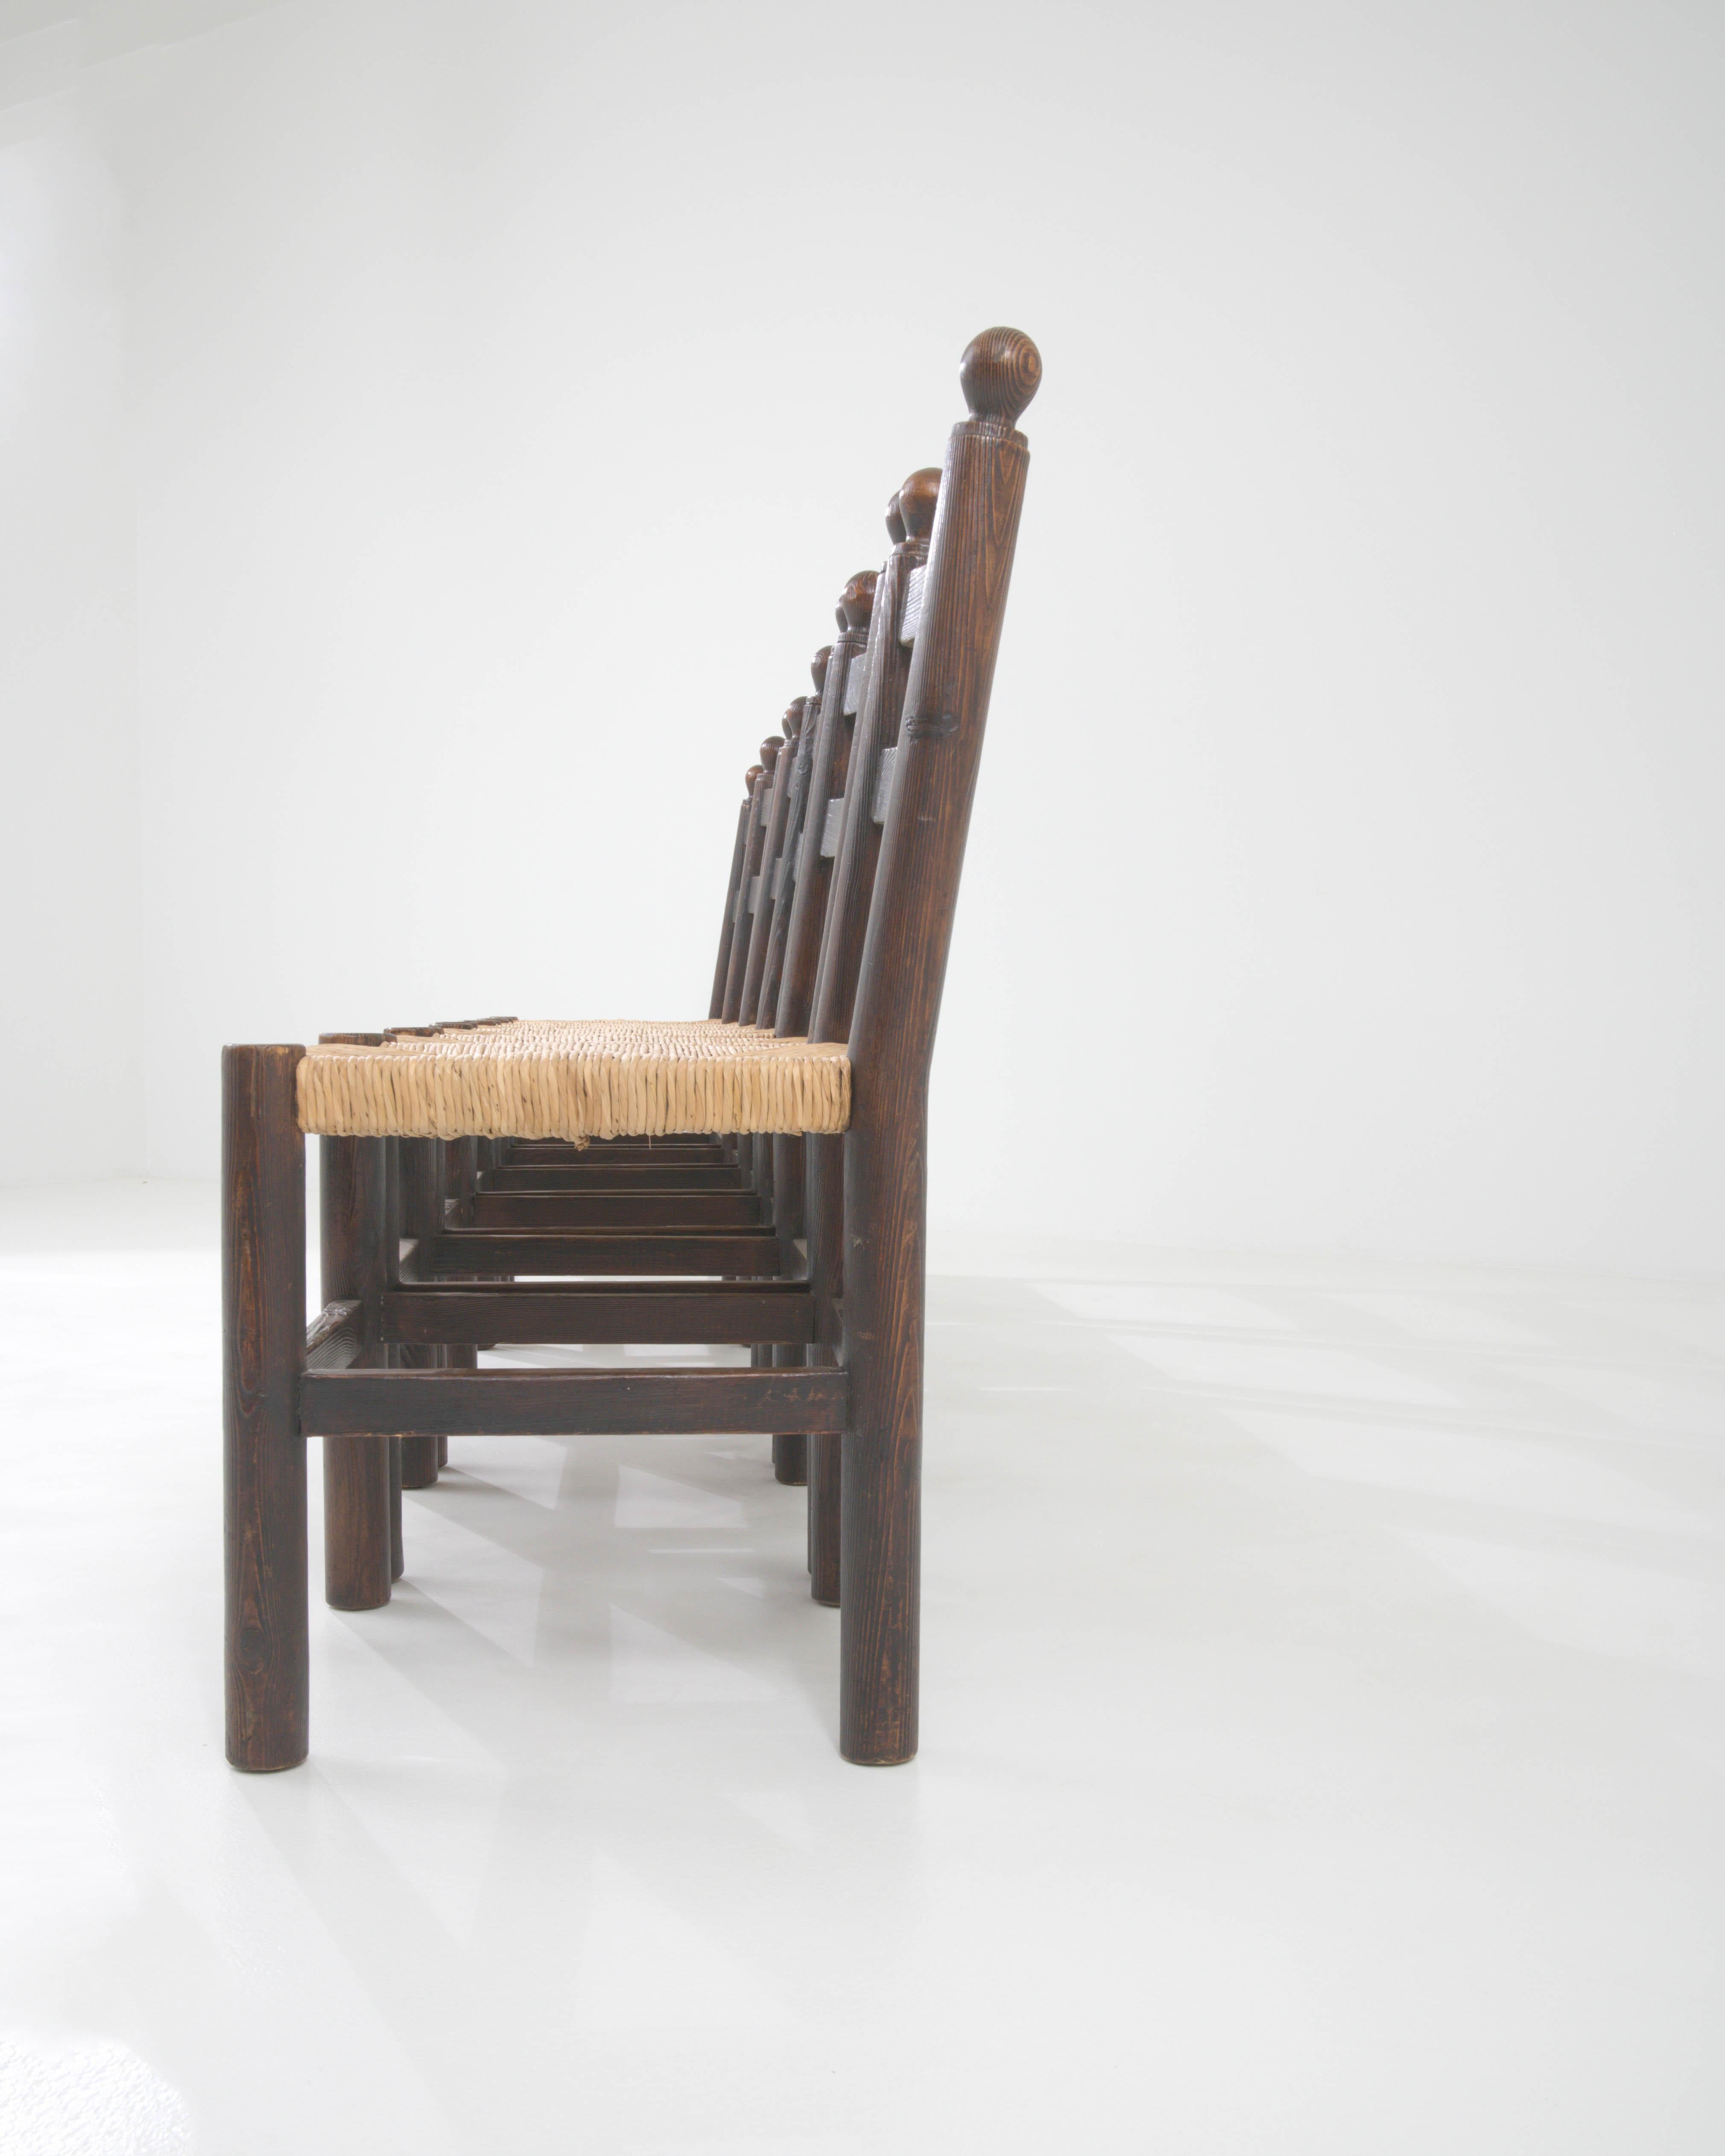 20th Century French Wooden Dining Chairs With Wicker Seats, Set of 6 For Sale 11